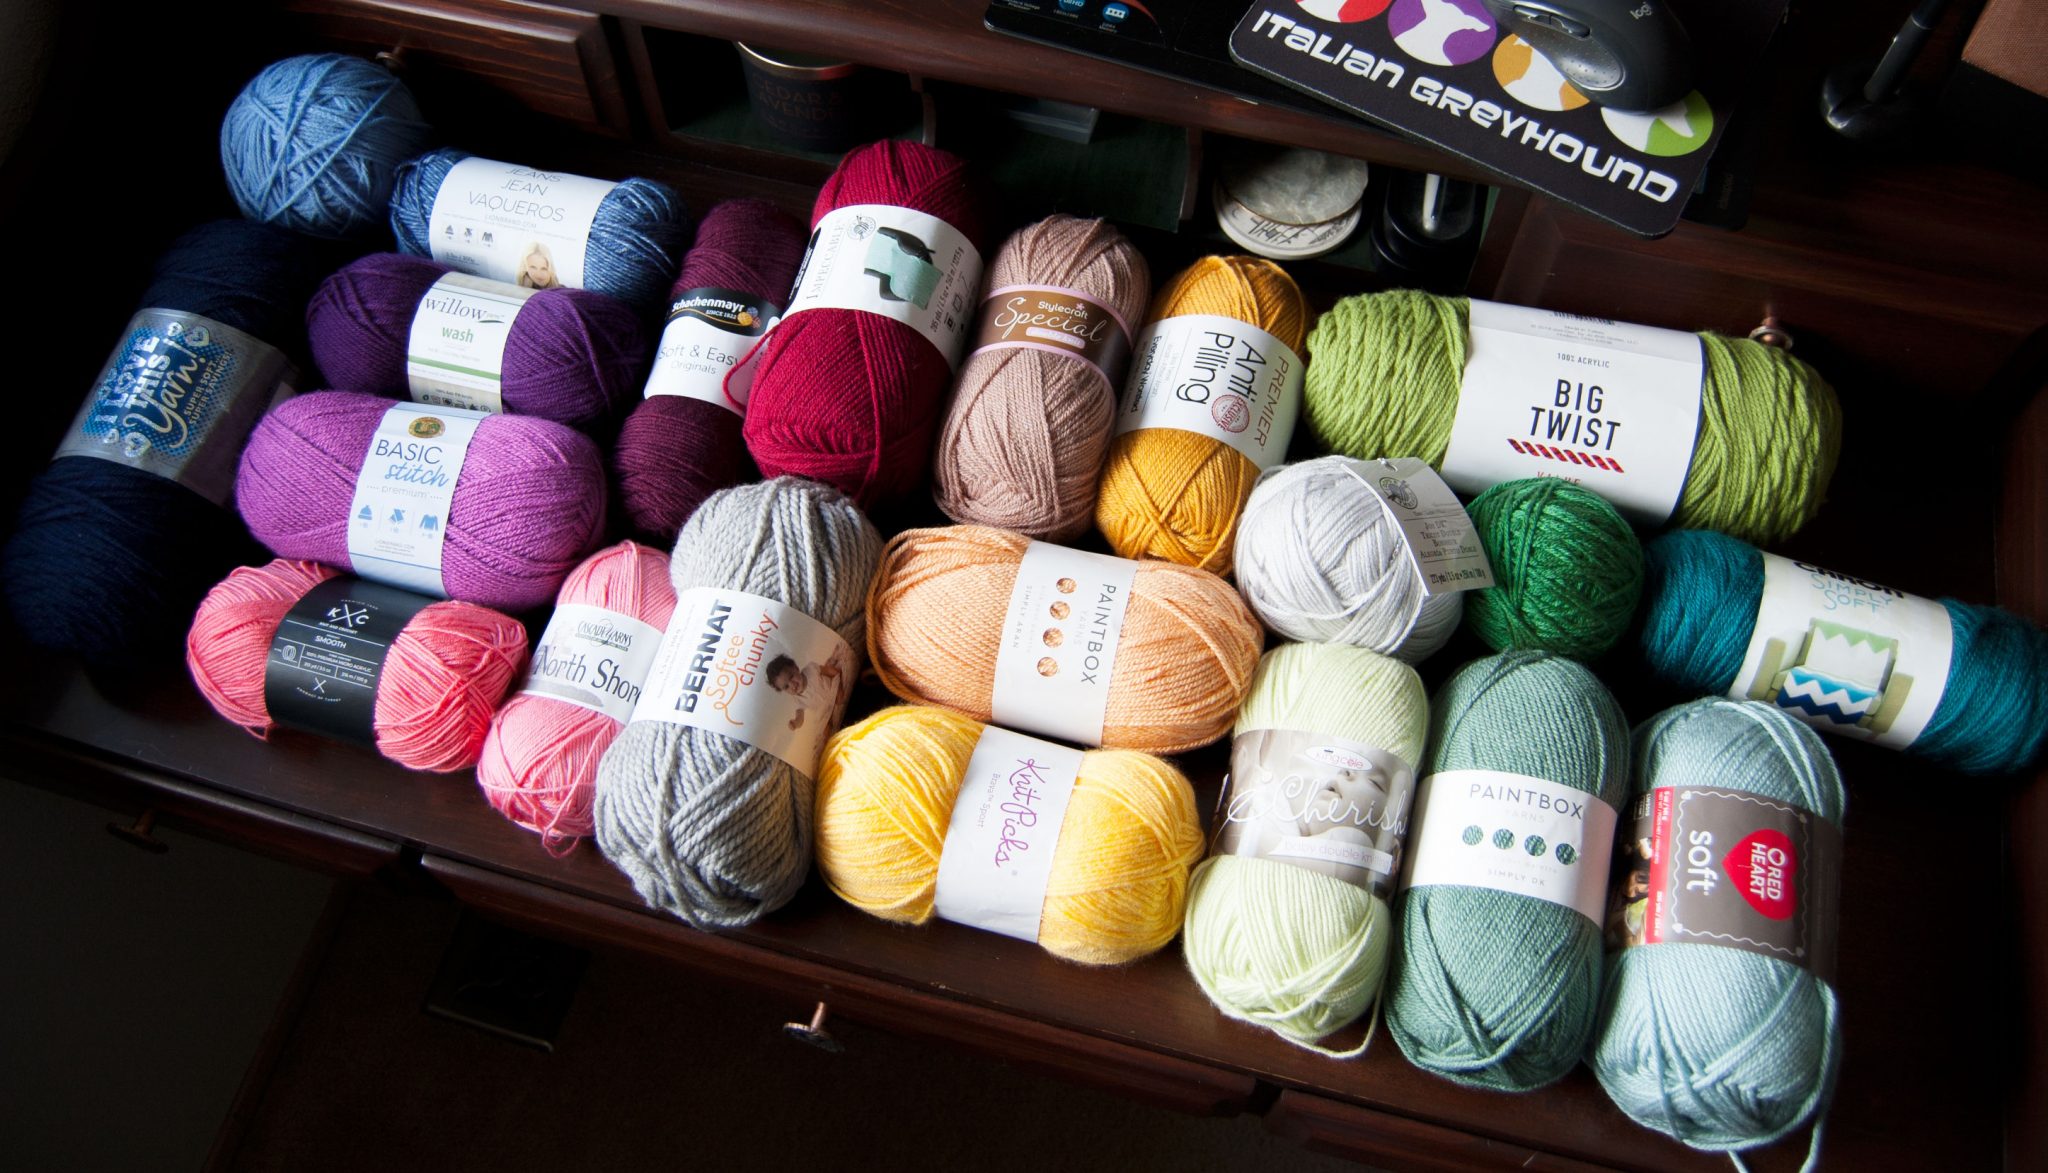 Introduction To The Ultimate Acrylic Yarn Comparison Budget Yarn Reviews